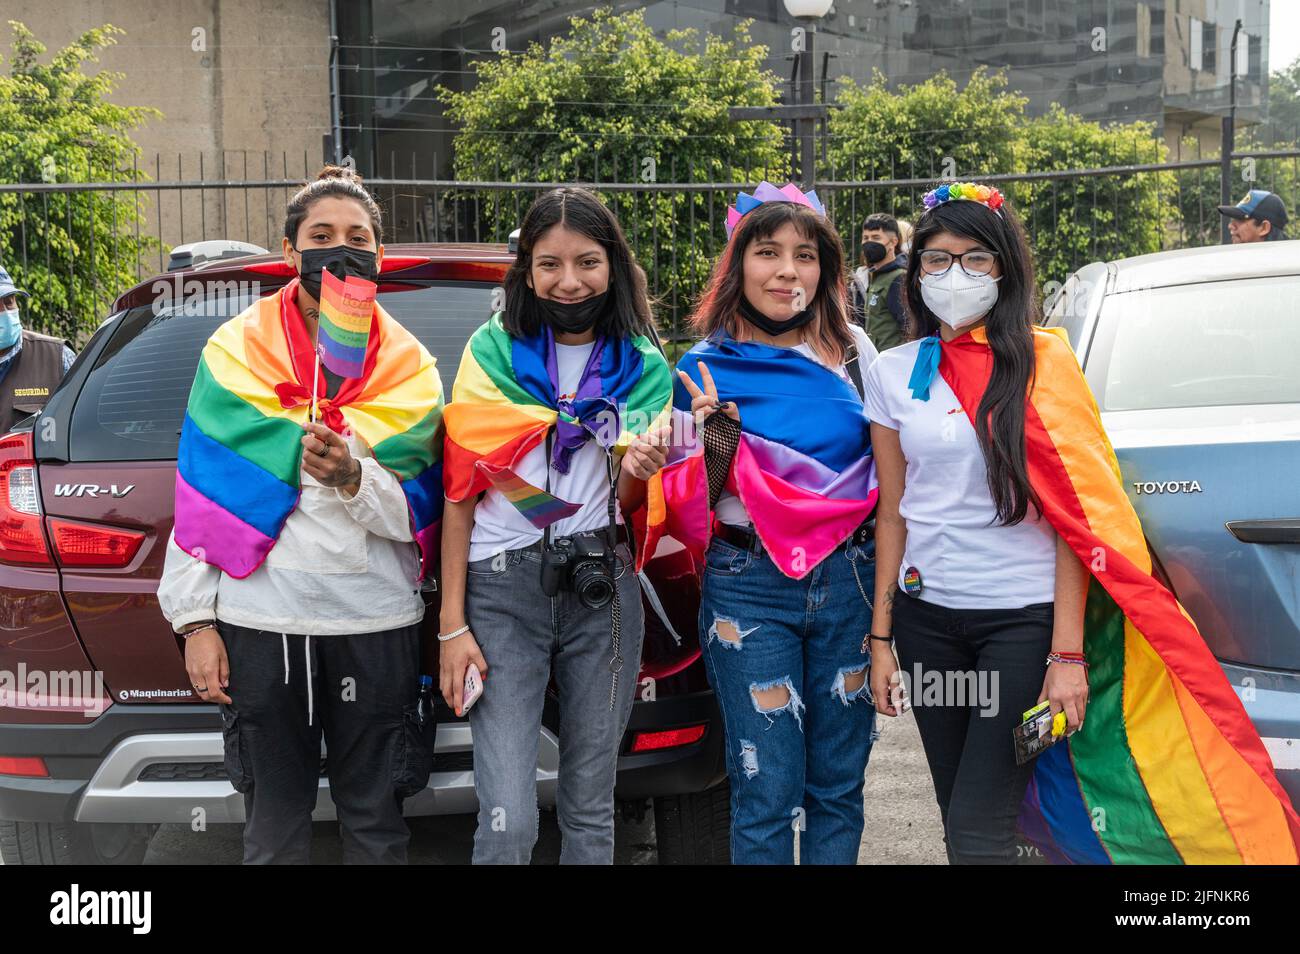 Photo of a group of young Latinx people posing with rainbow and bisexual flag capes at Lima's Marcha del Orgullo, the city's annual Pride march event. Stock Photo